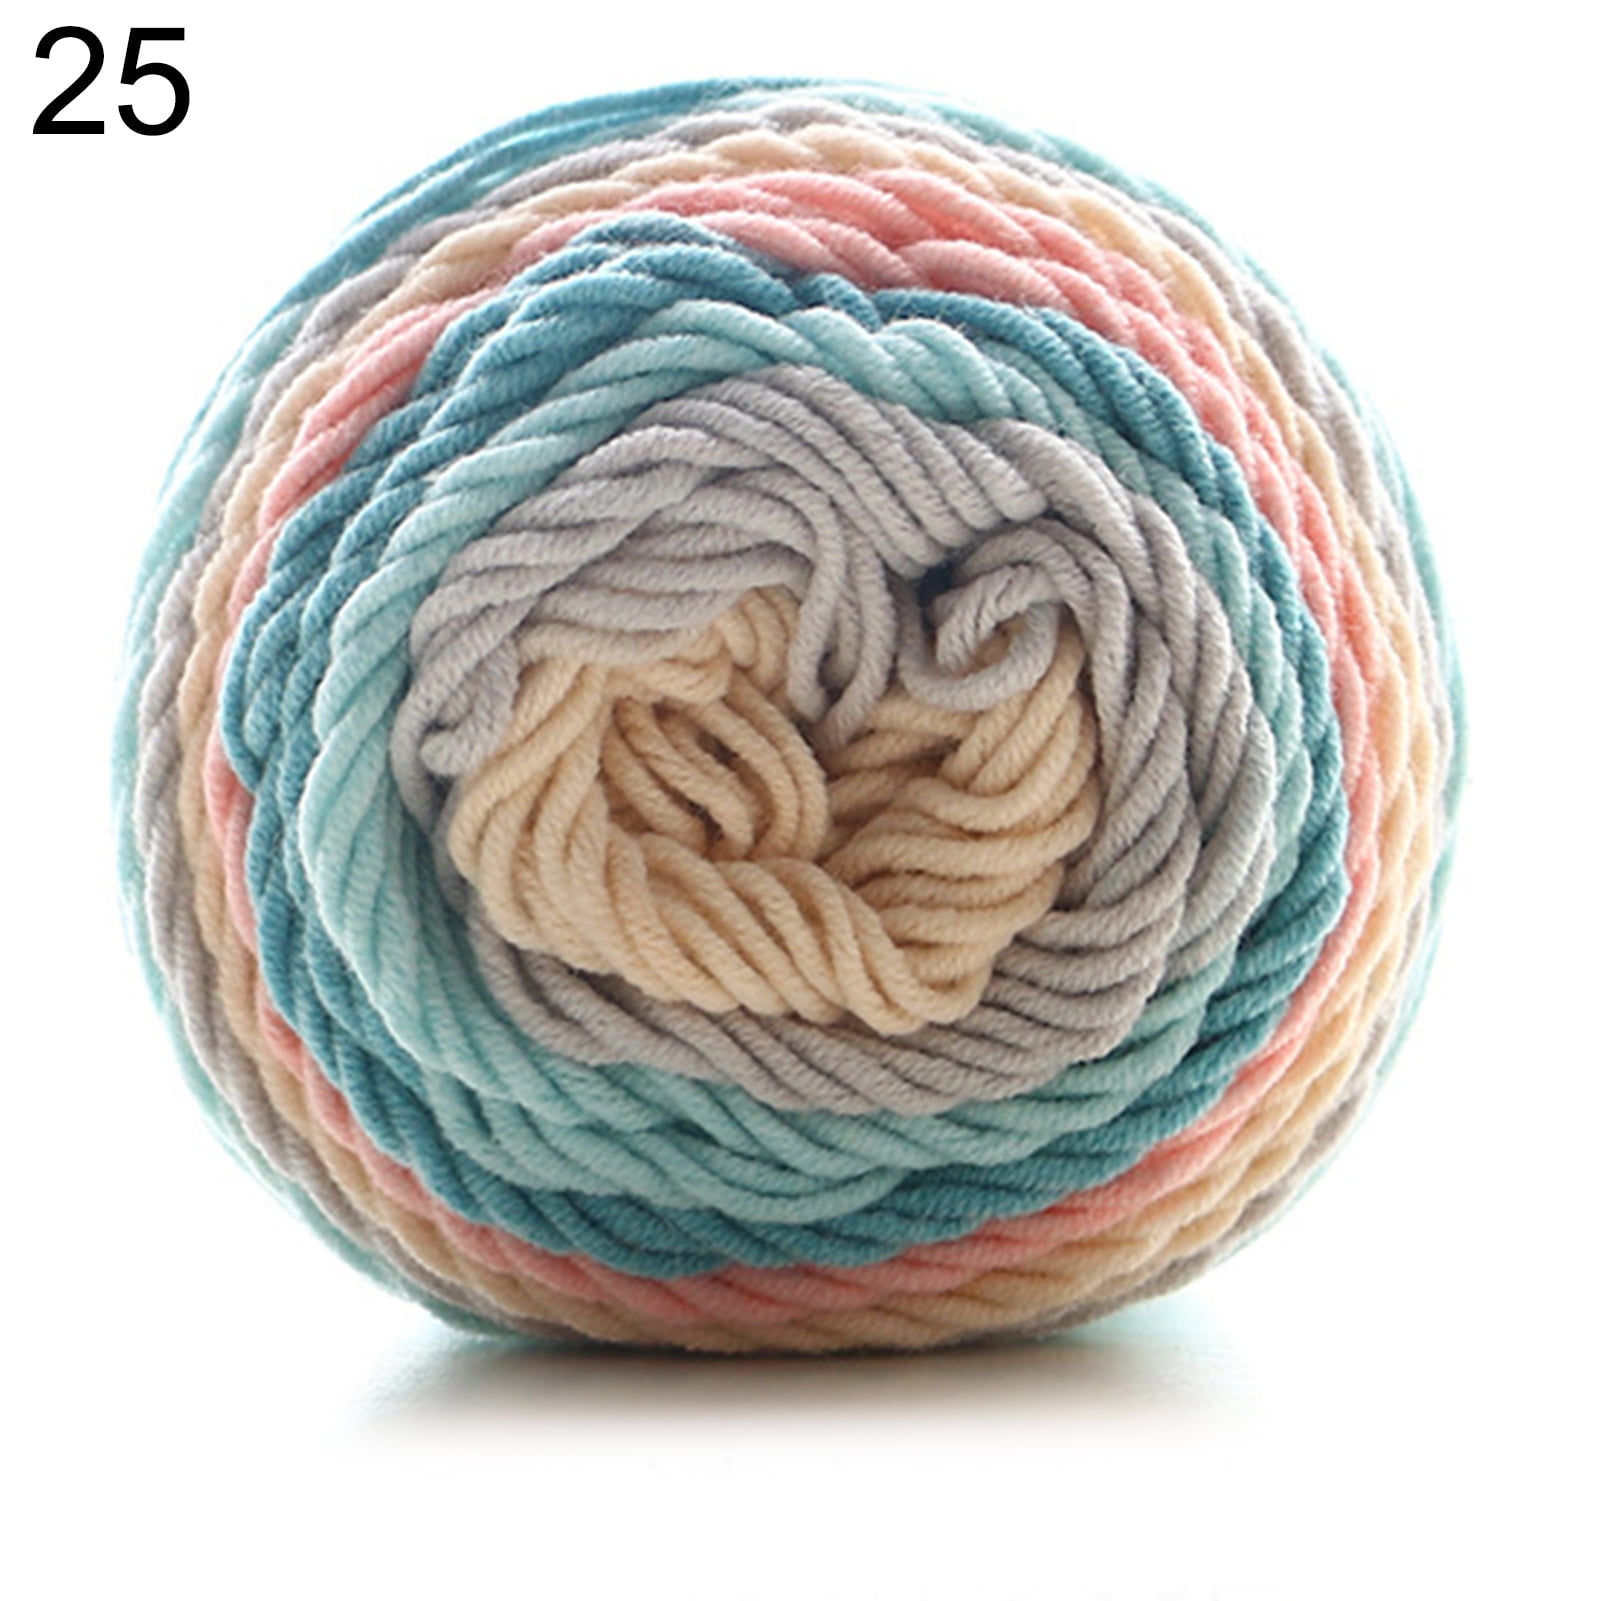 Crochet Yarn Skeins 165G Single Ply Chunky Crochet Yarn Multicolored Yarn  for Knitting and Crafts Soft Knitted Yarn Sweater Scarf Crafting Woven